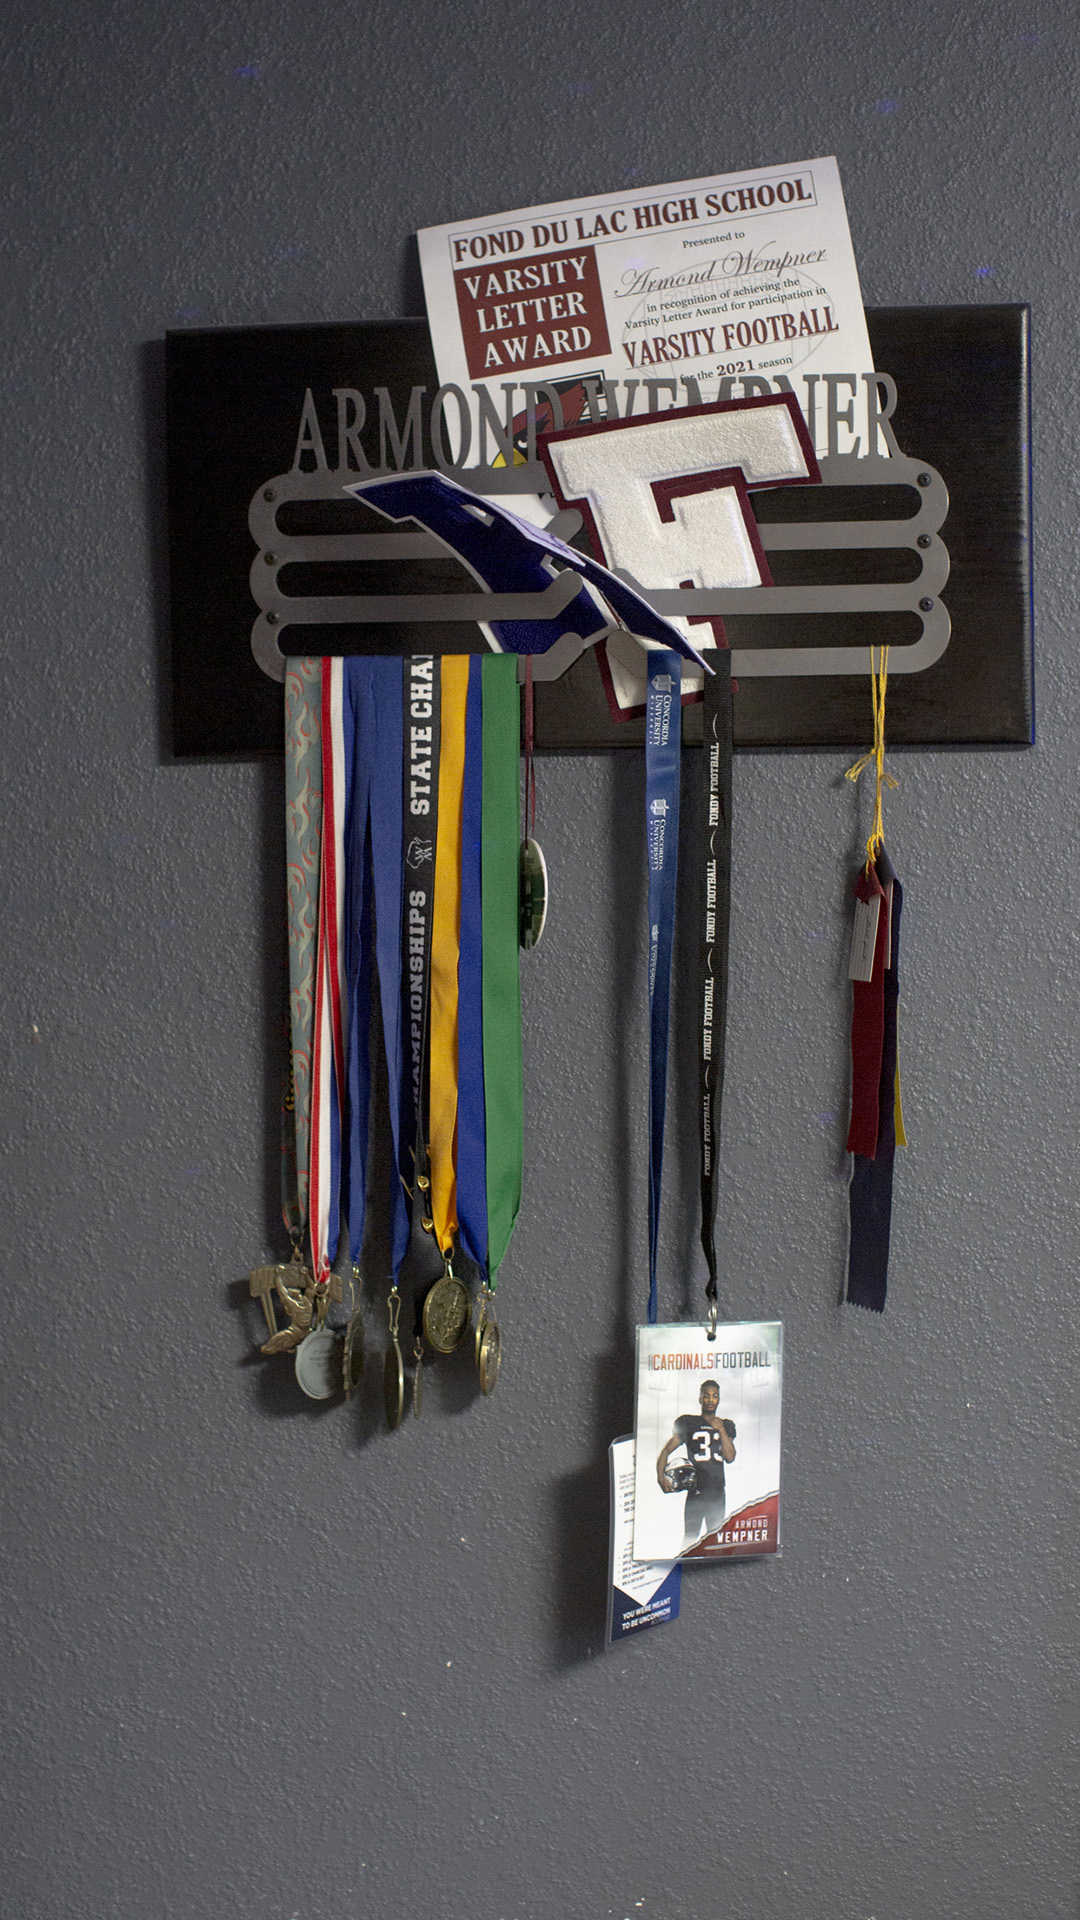 Medals, ID cards on lanyards, high-school letters, ribbons and other items cover a wall-mounted metal and wood display with the name "Armond Wempner."